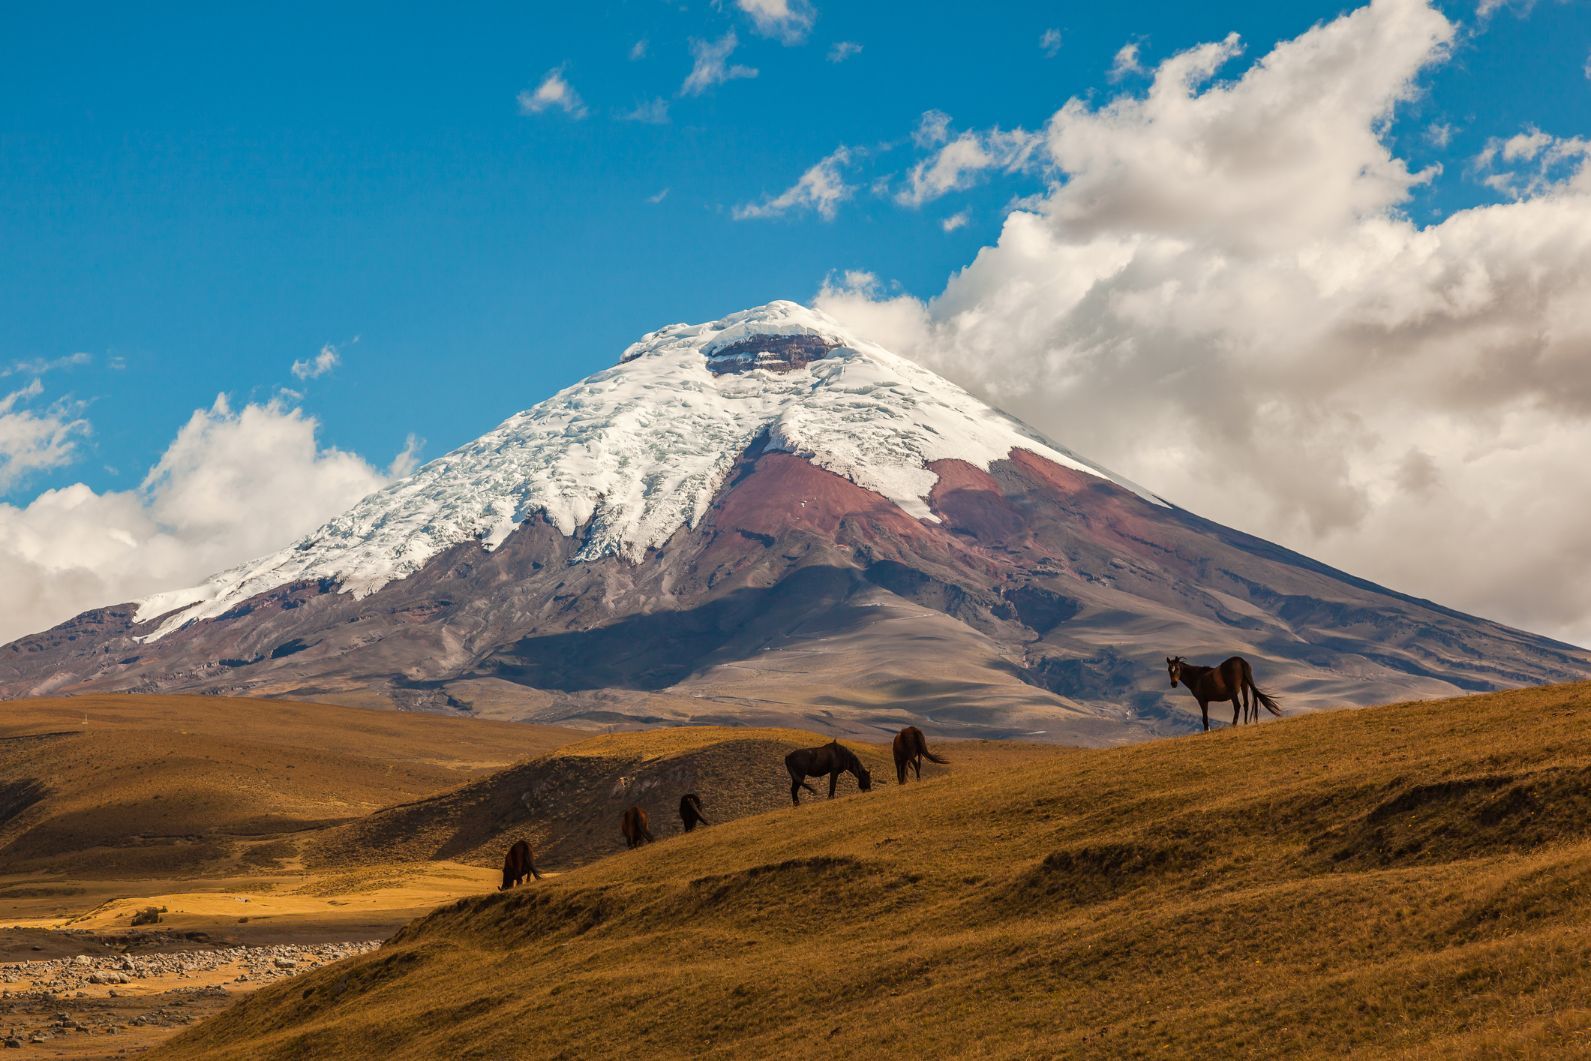 Wild horses silhouetted in front of Cotopaxi volcano, Ecuador